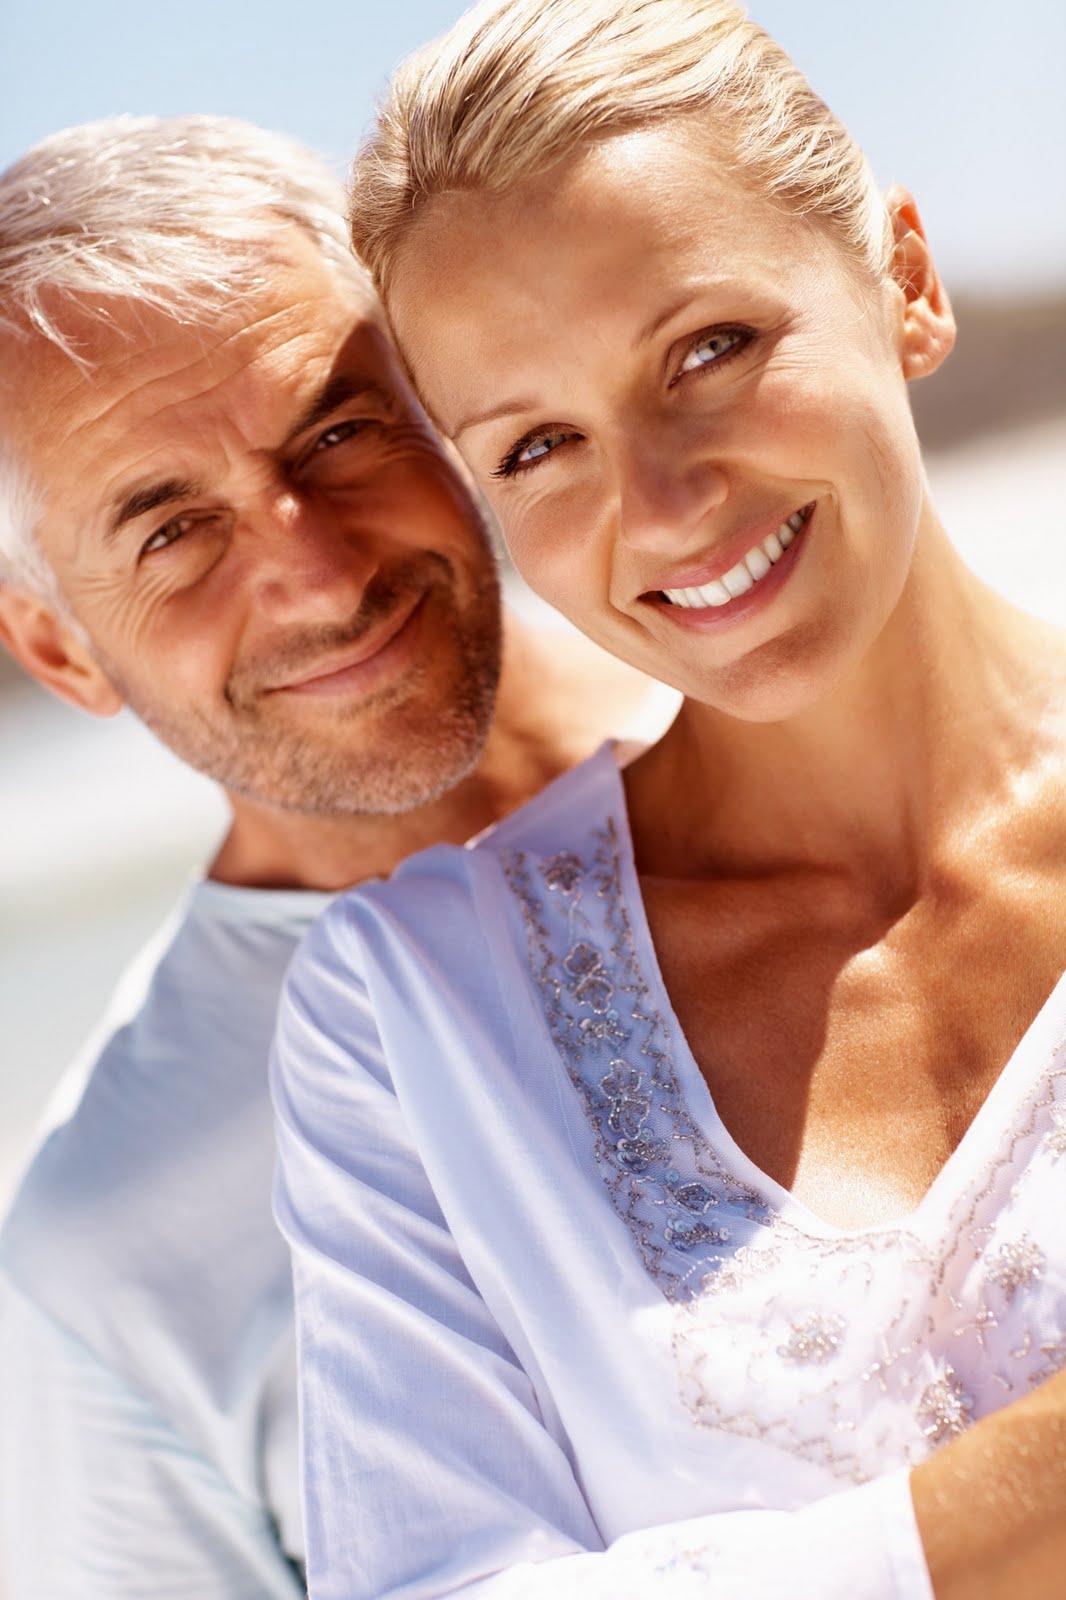 Top rated dating sites for over 50 years old